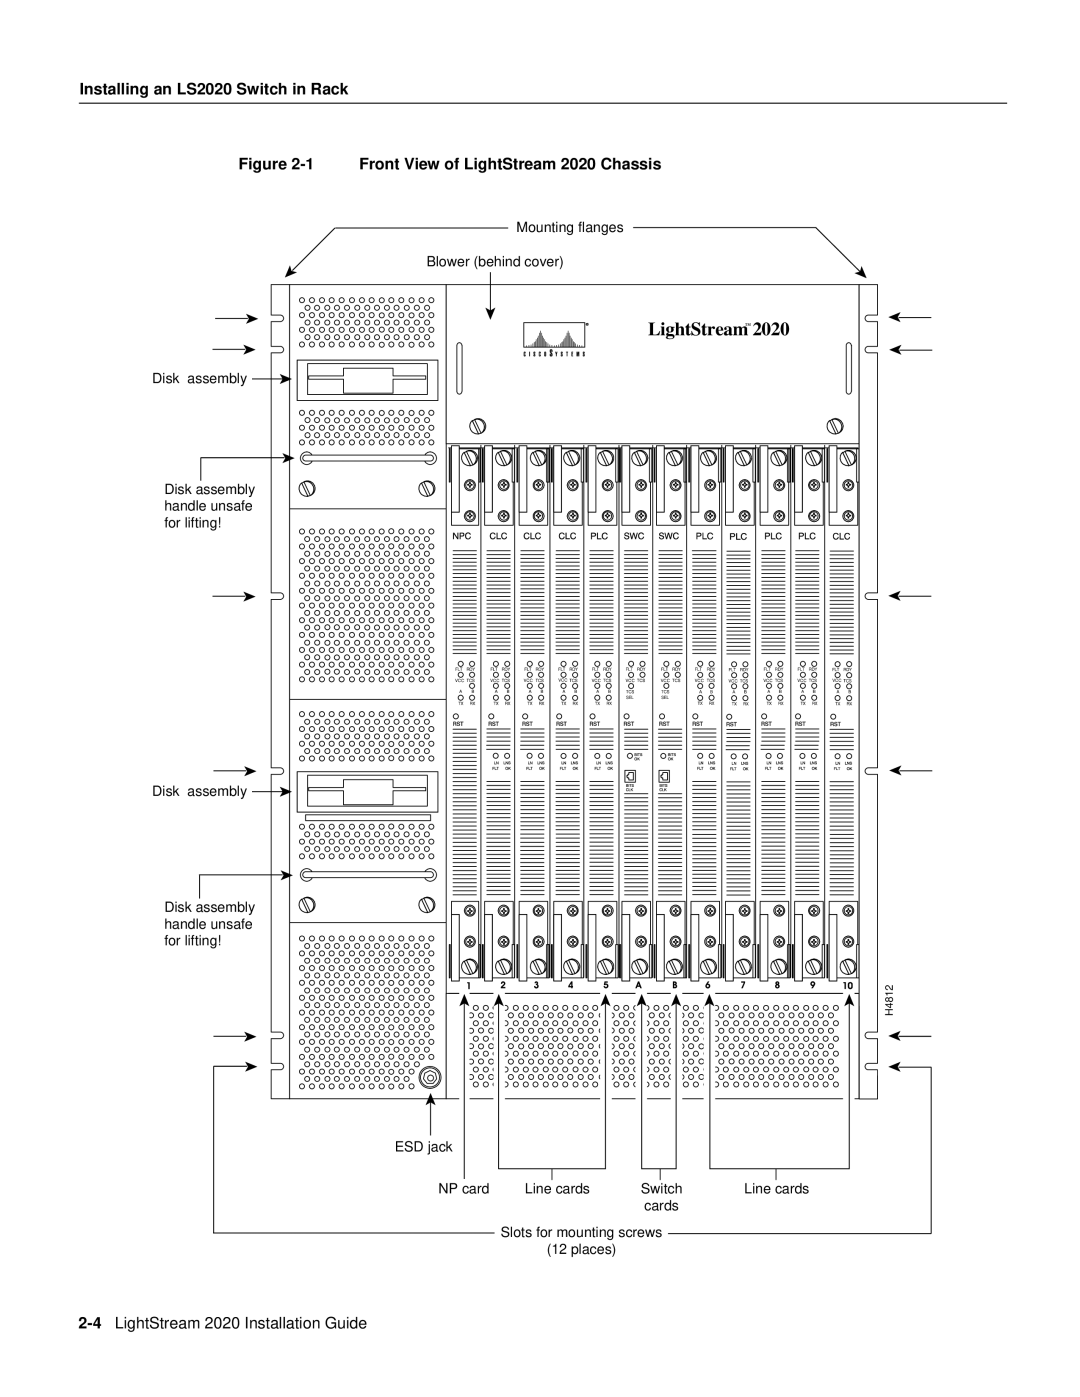 Cisco Systems manual Installing an LS2020 Switch in Rack, 1 Front View of LightStream 2020 Chassis 